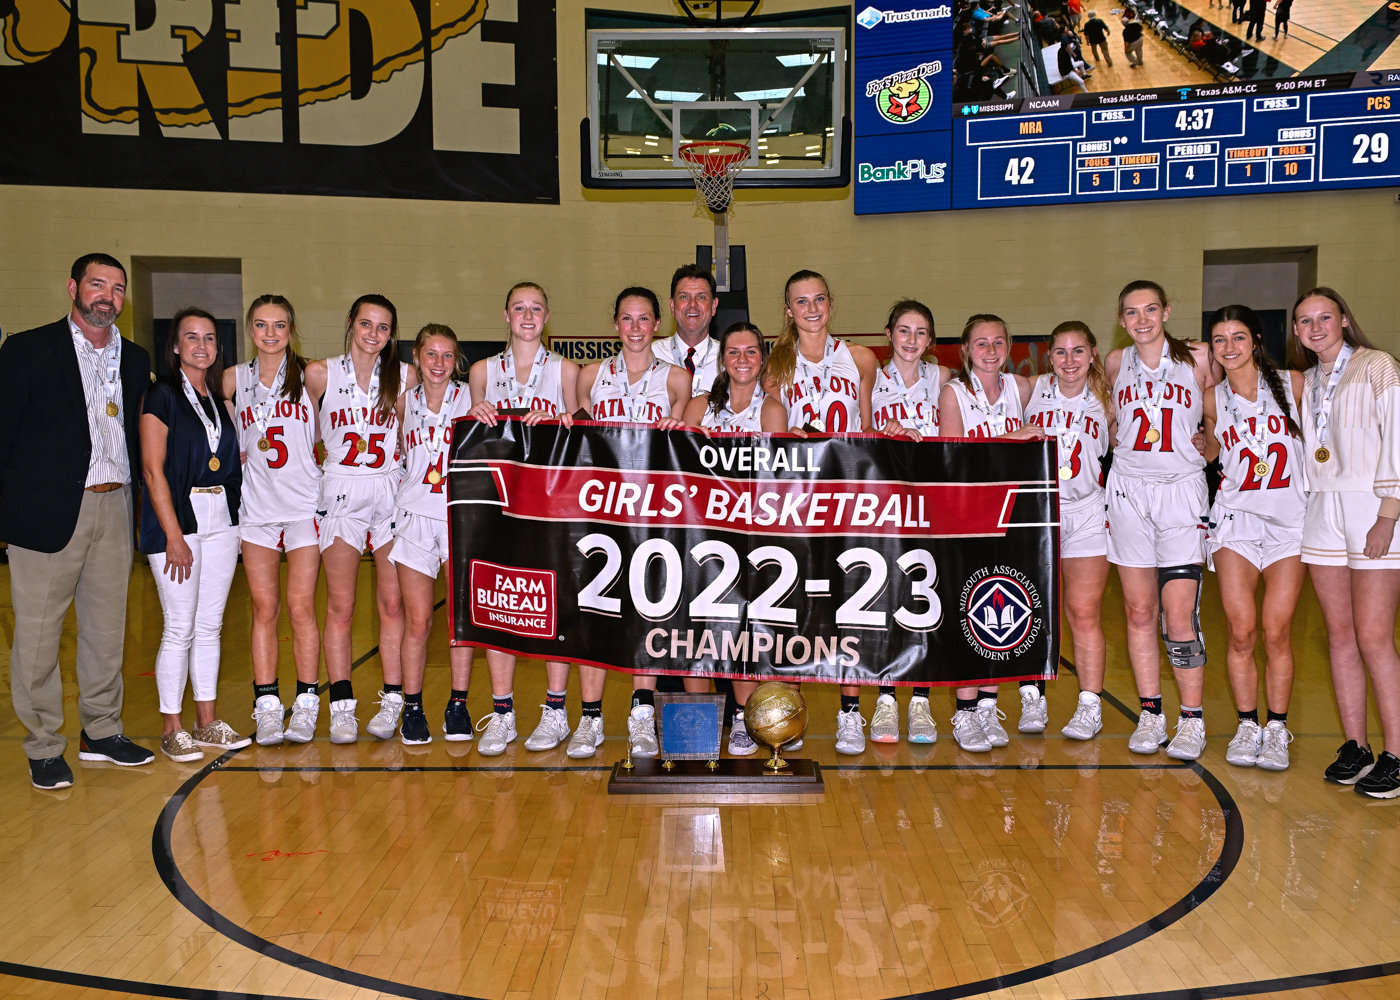 The MRA Lady Patriots won the 2022-2023 Overall Girls’ Basketball State Championship last week.